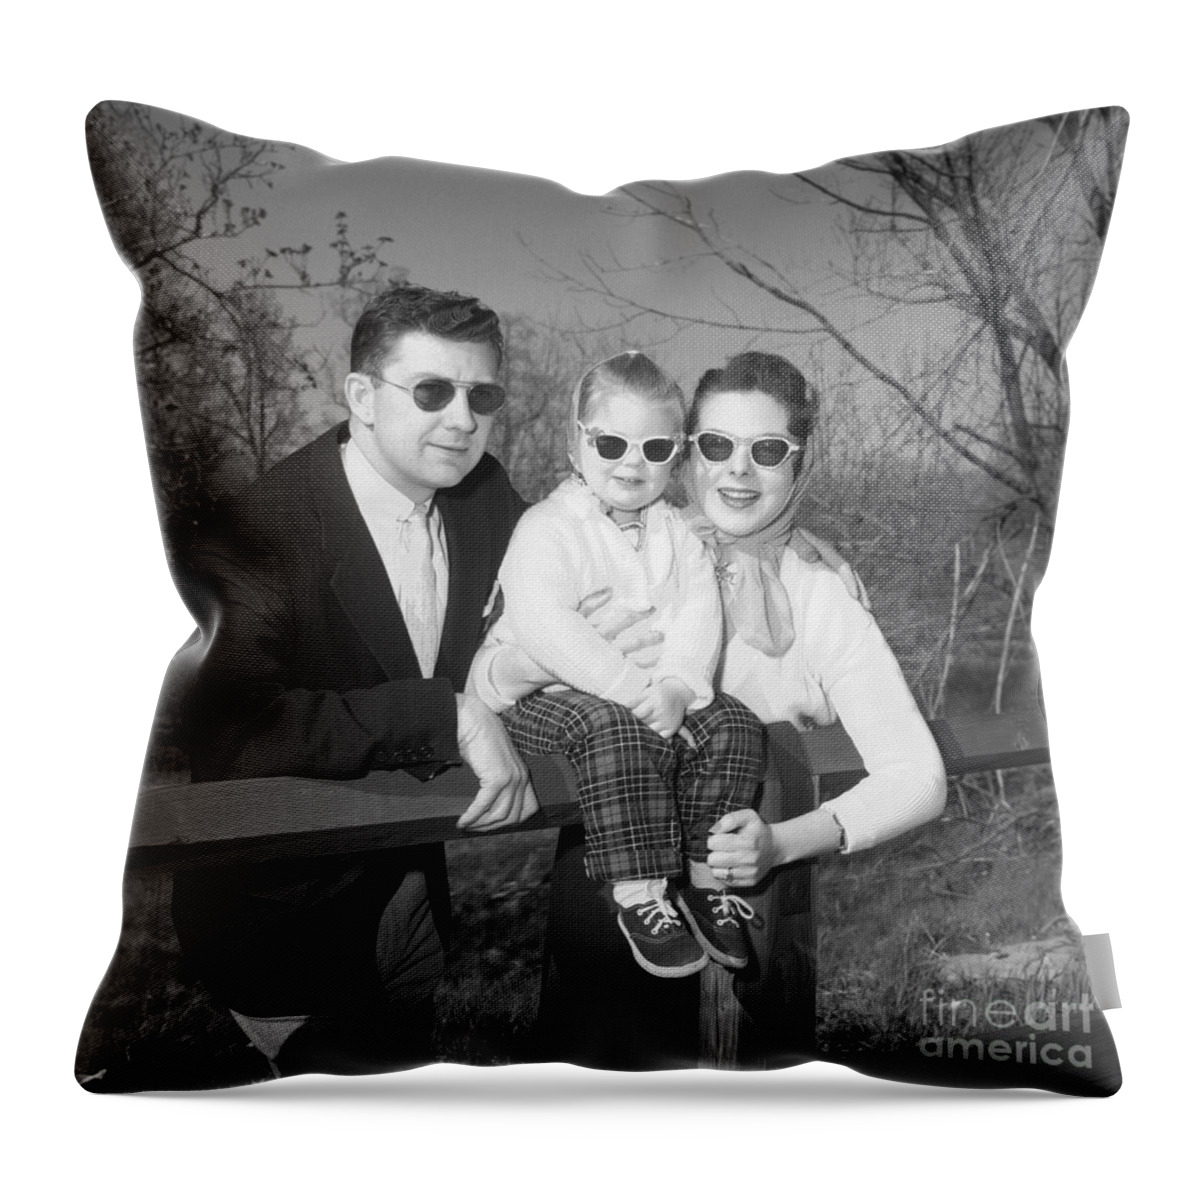 1950s Throw Pillow featuring the photograph Family Portrait With Sunglasses, C.1950s by J. Rogers/ClassicStock